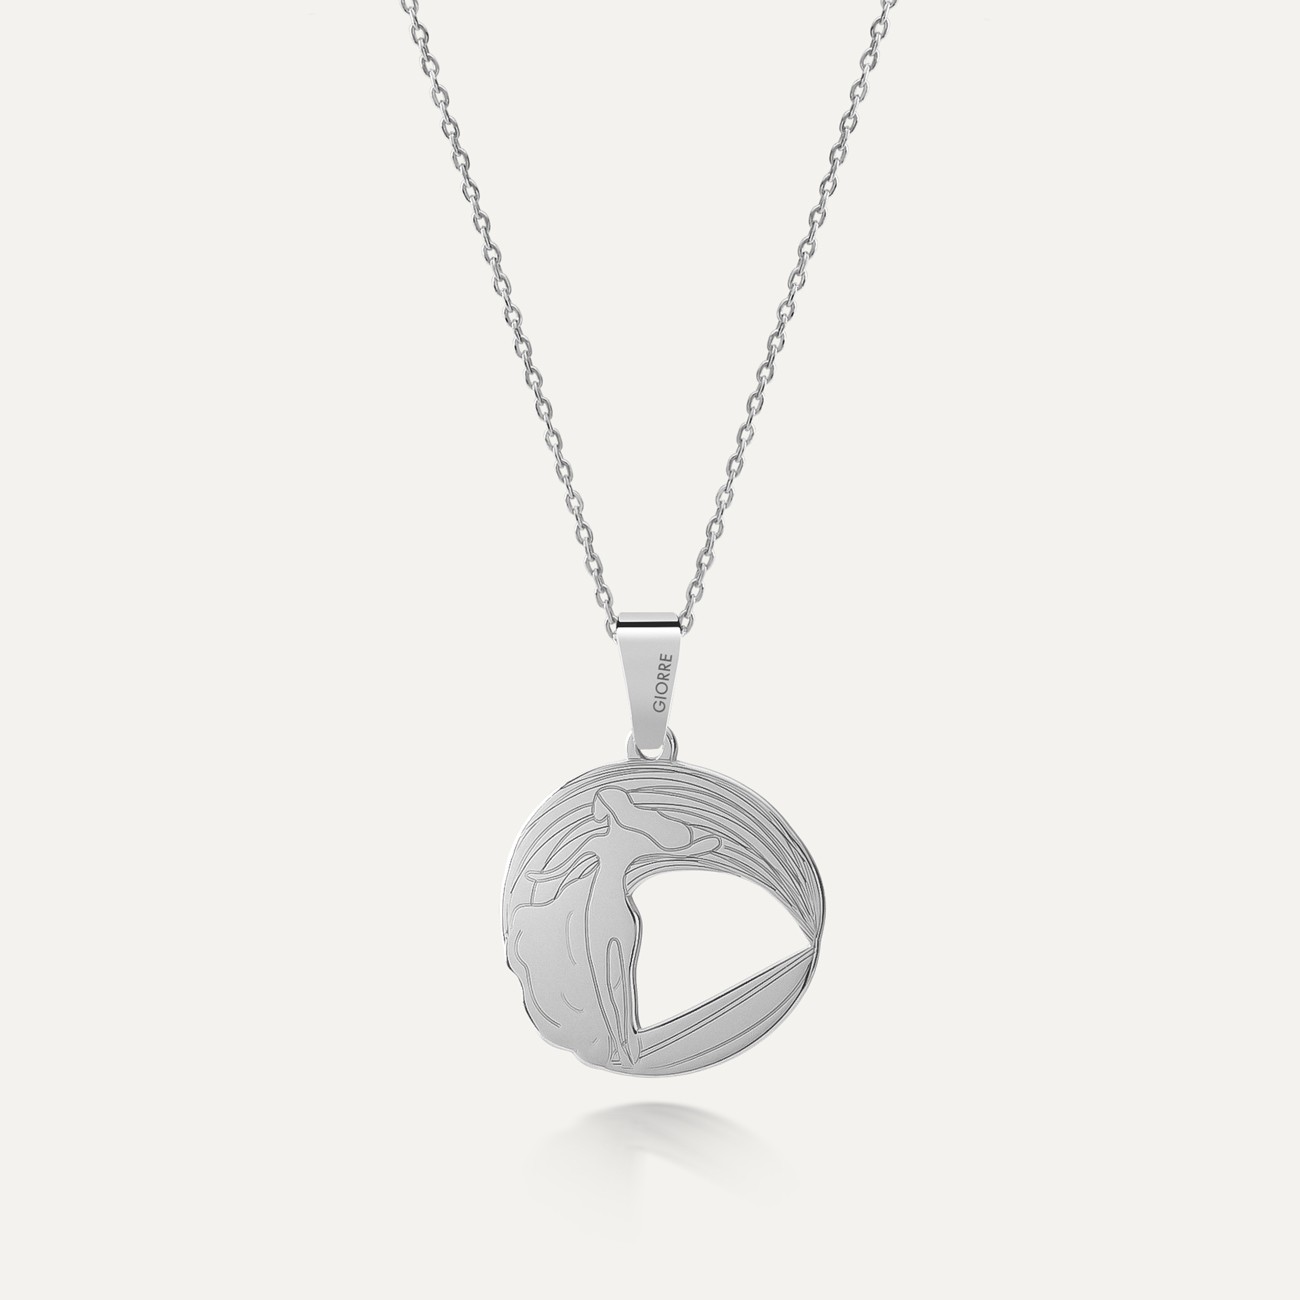 Silver surfer necklace, AUGUSTYNKA x GIORRE